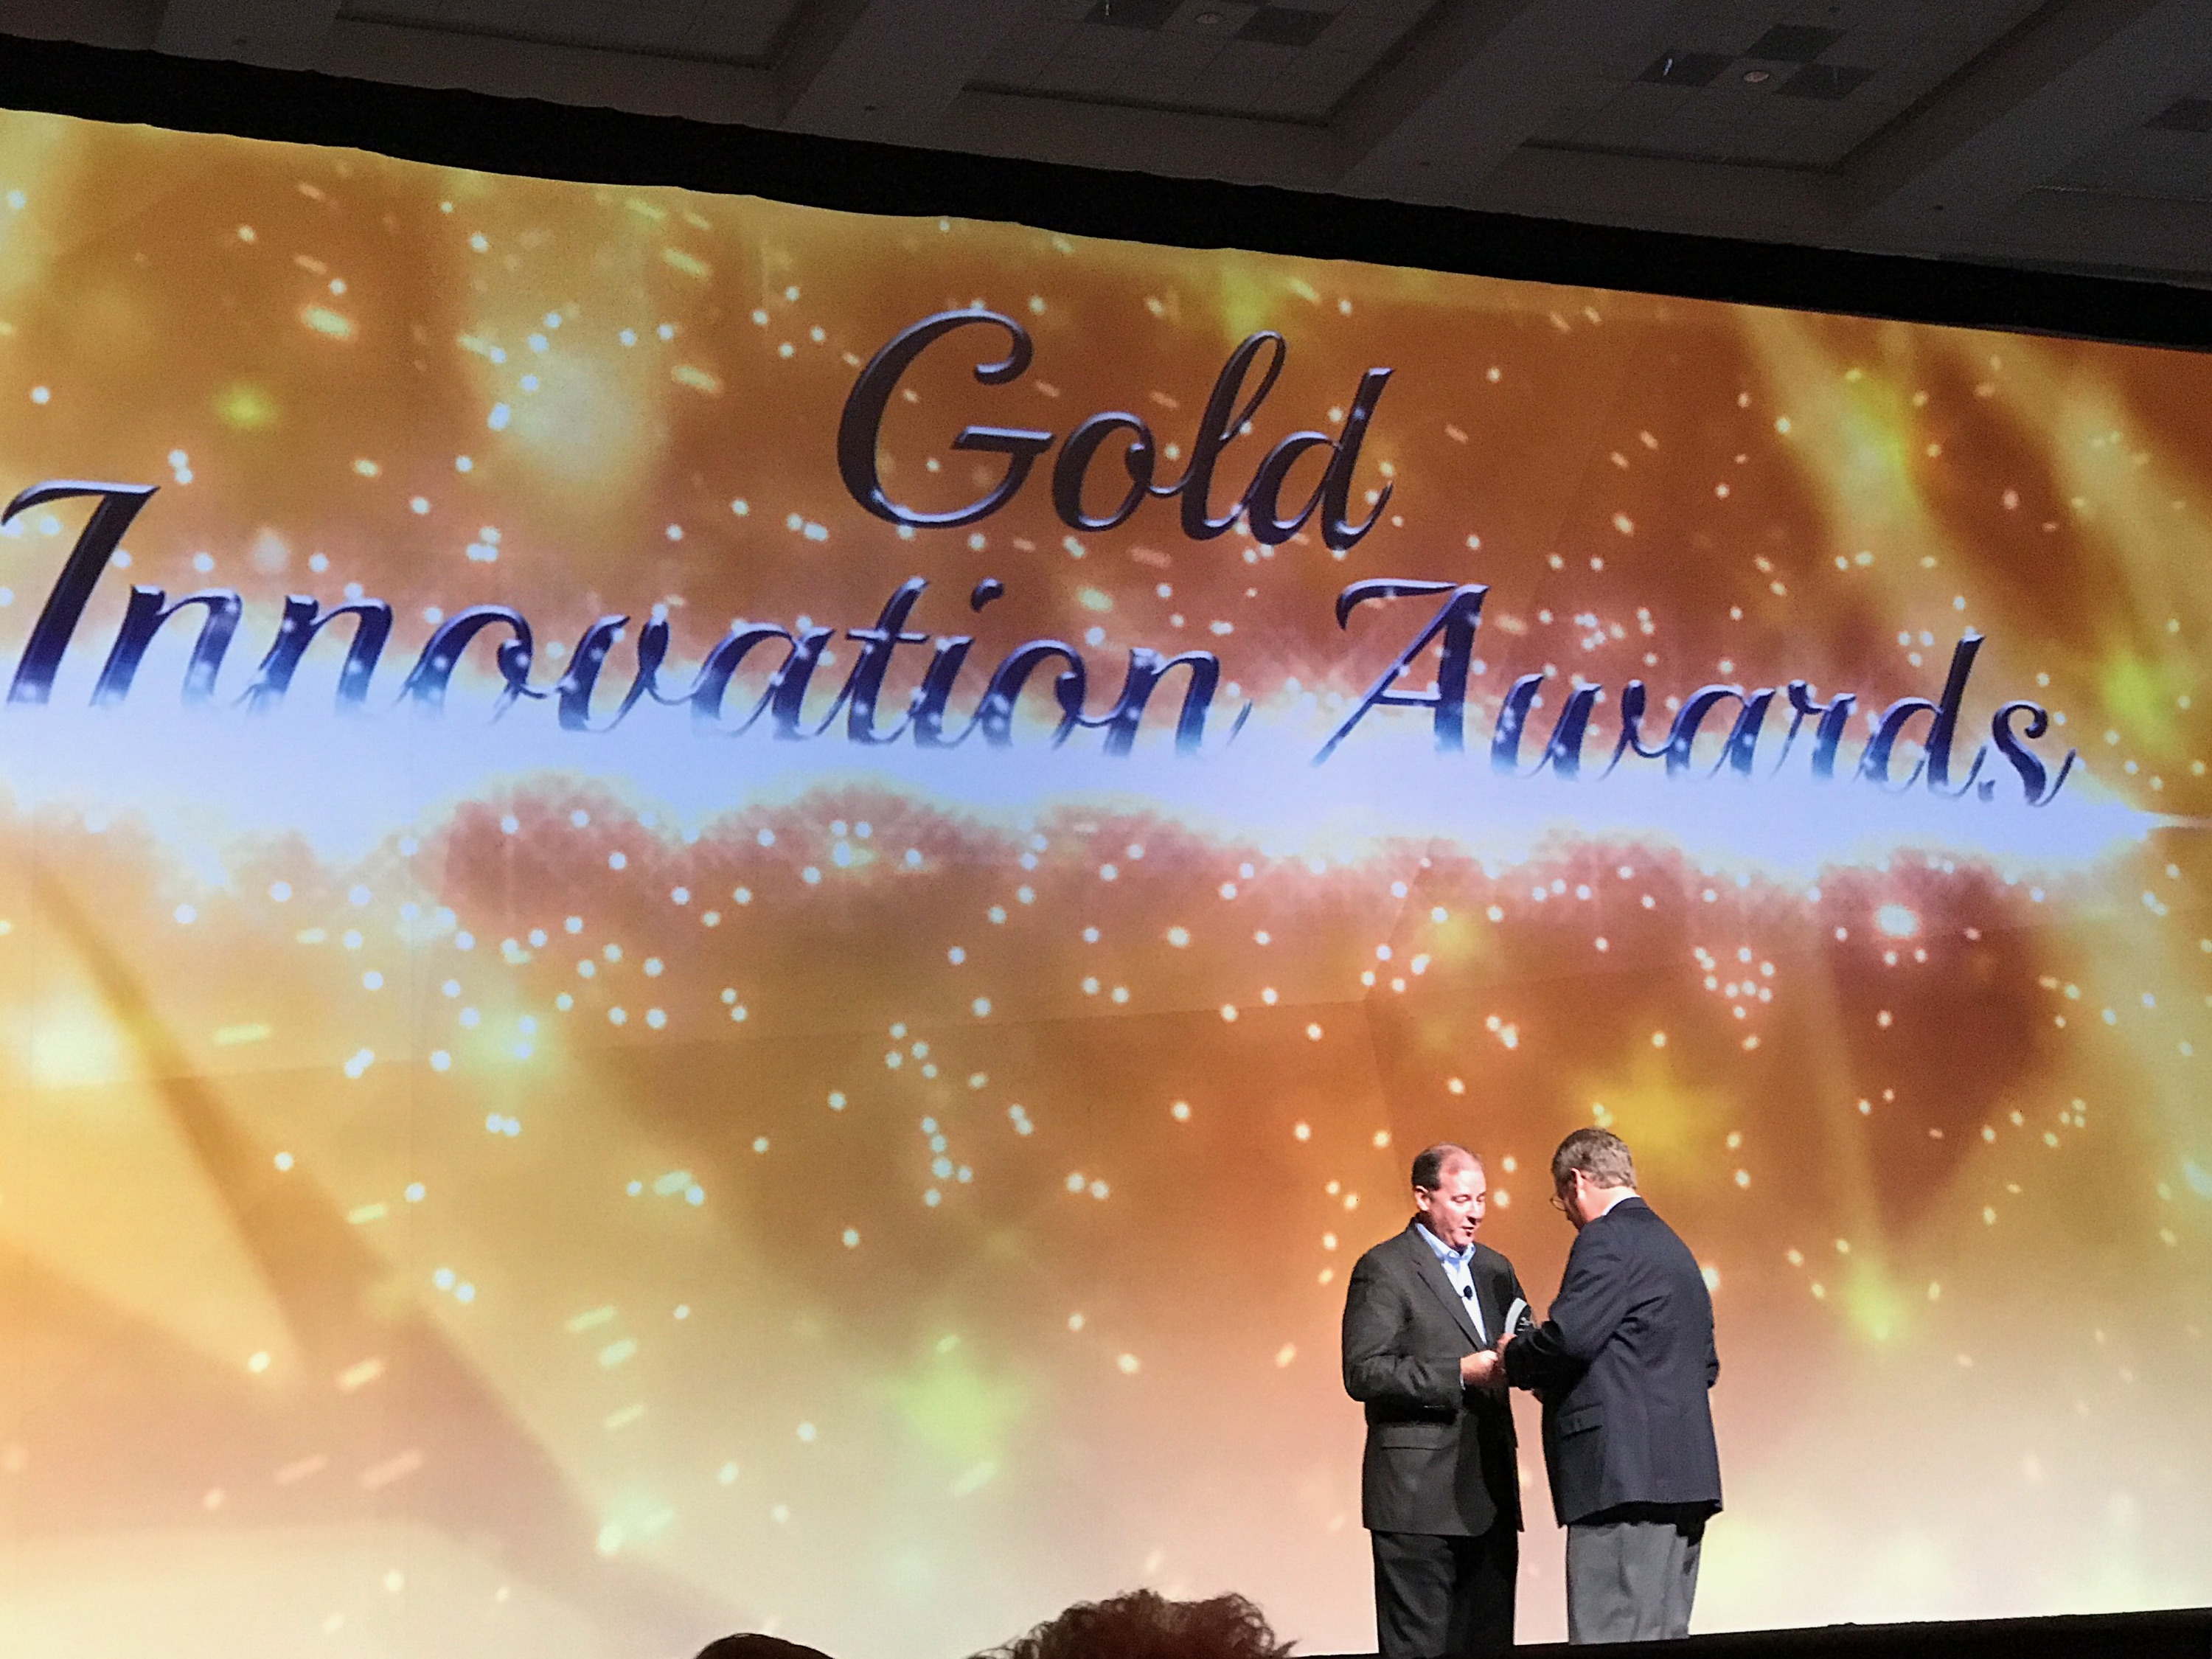 Gold Innovation Award accepted by Russ Watson